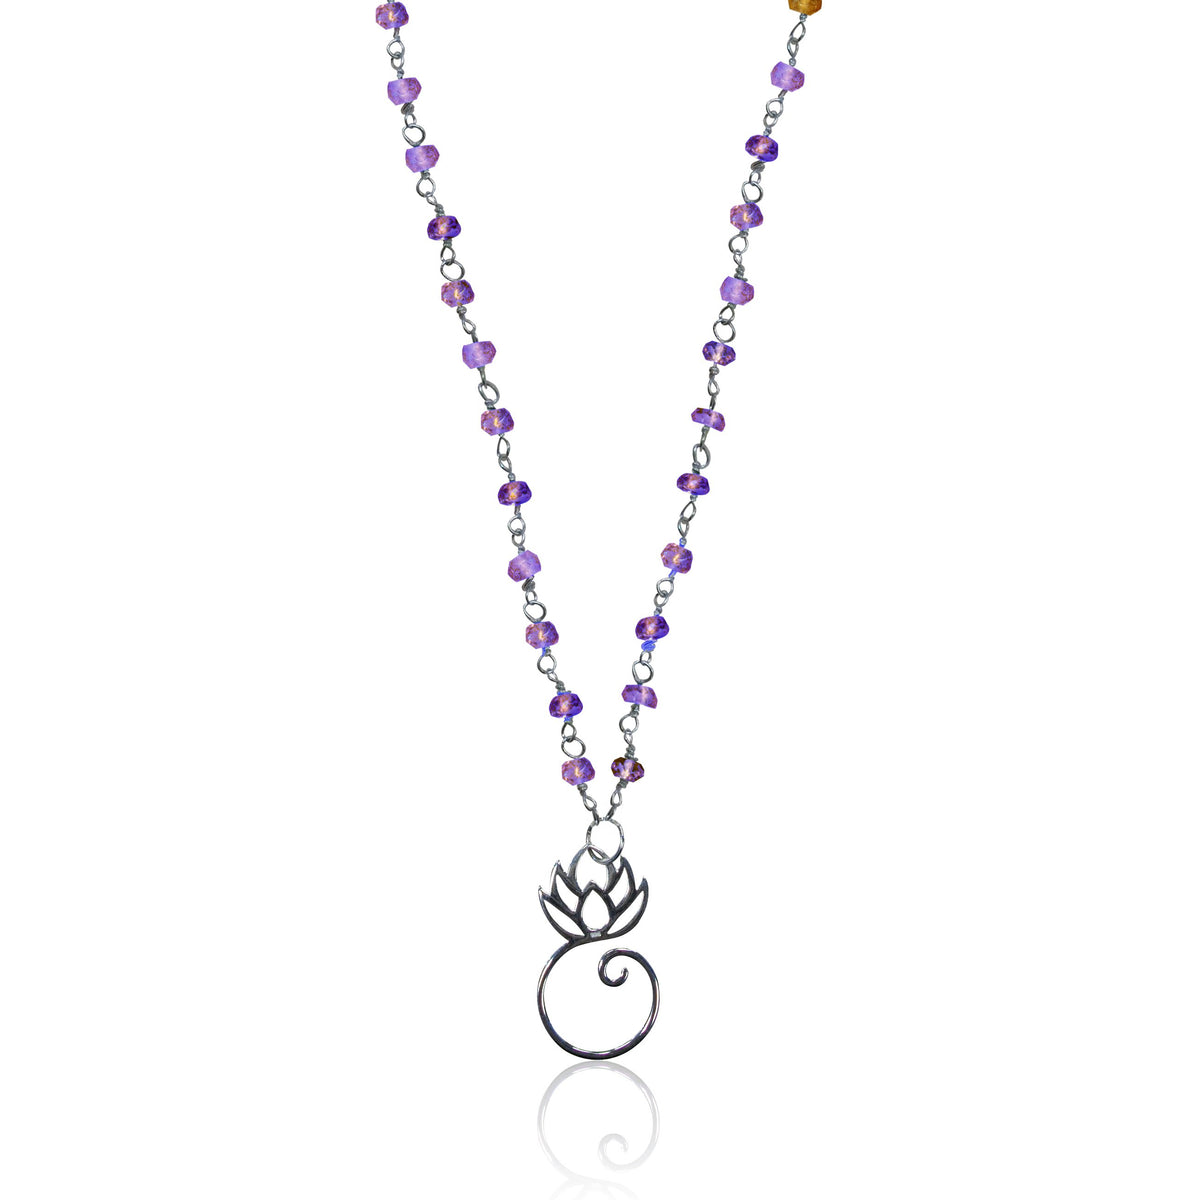 Amethyst Necklace with Lotus Flower for Calming